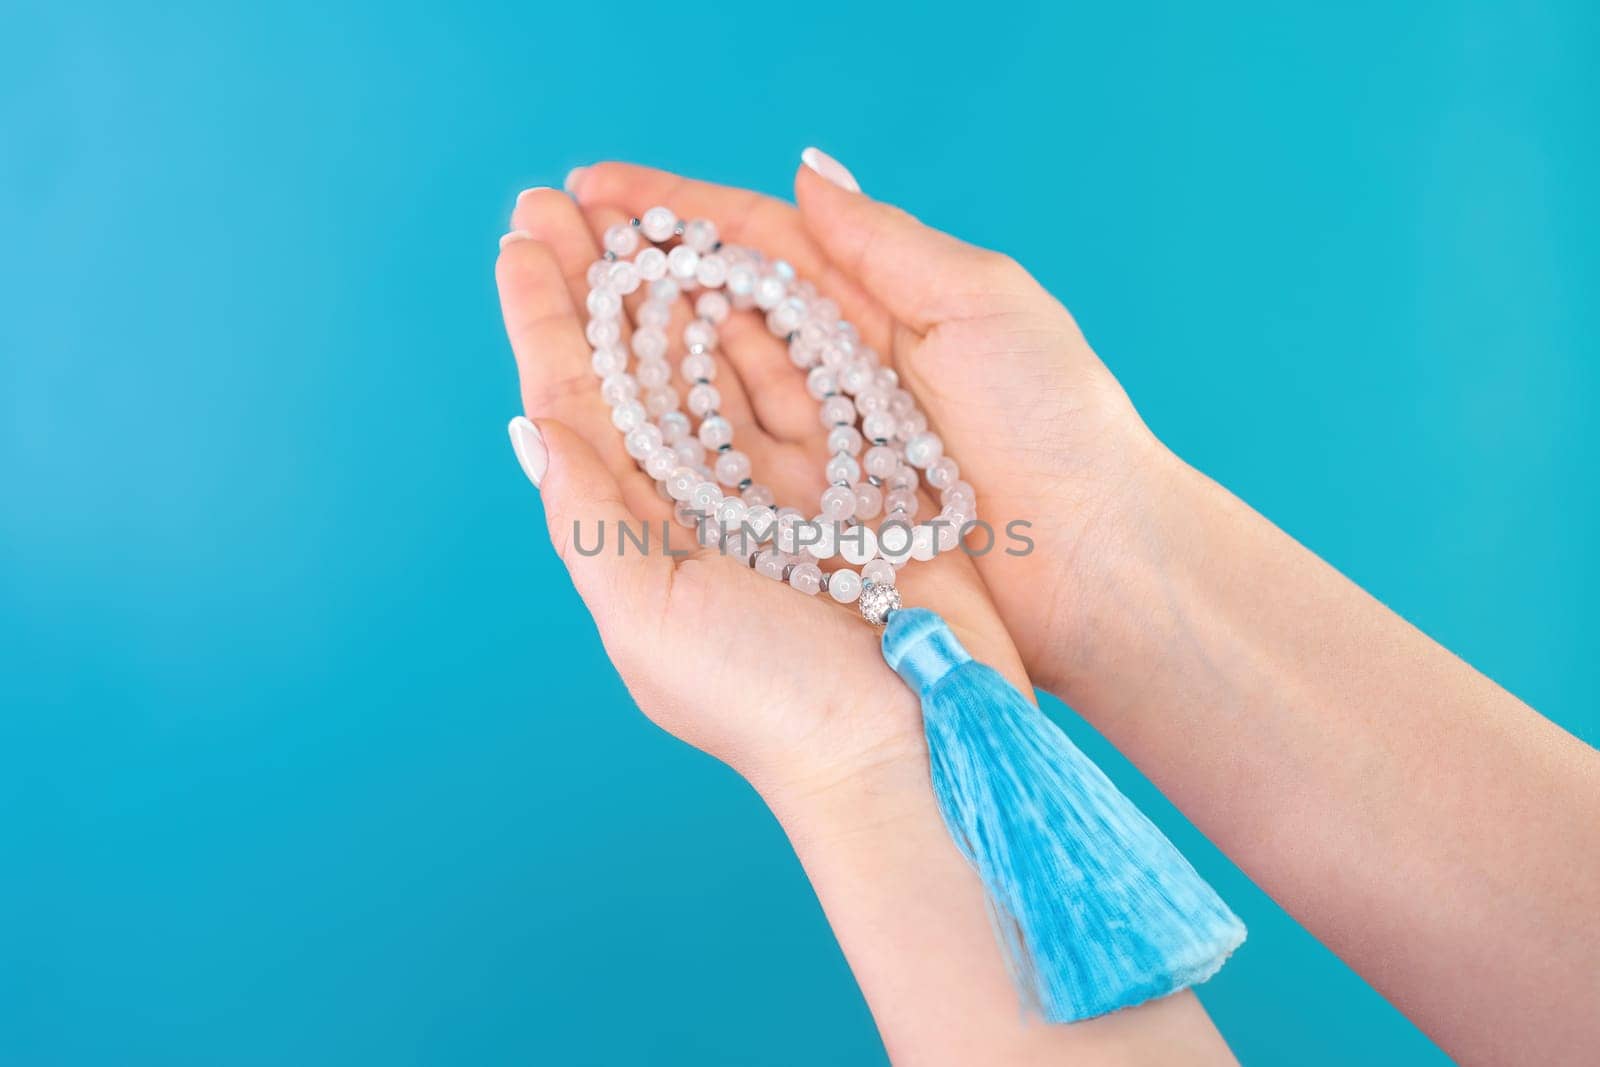 Moon stone mala beads in female hand on blue background. Gemstone strand used for keeping count during mantra meditations. Spirituality, religion, God concept.